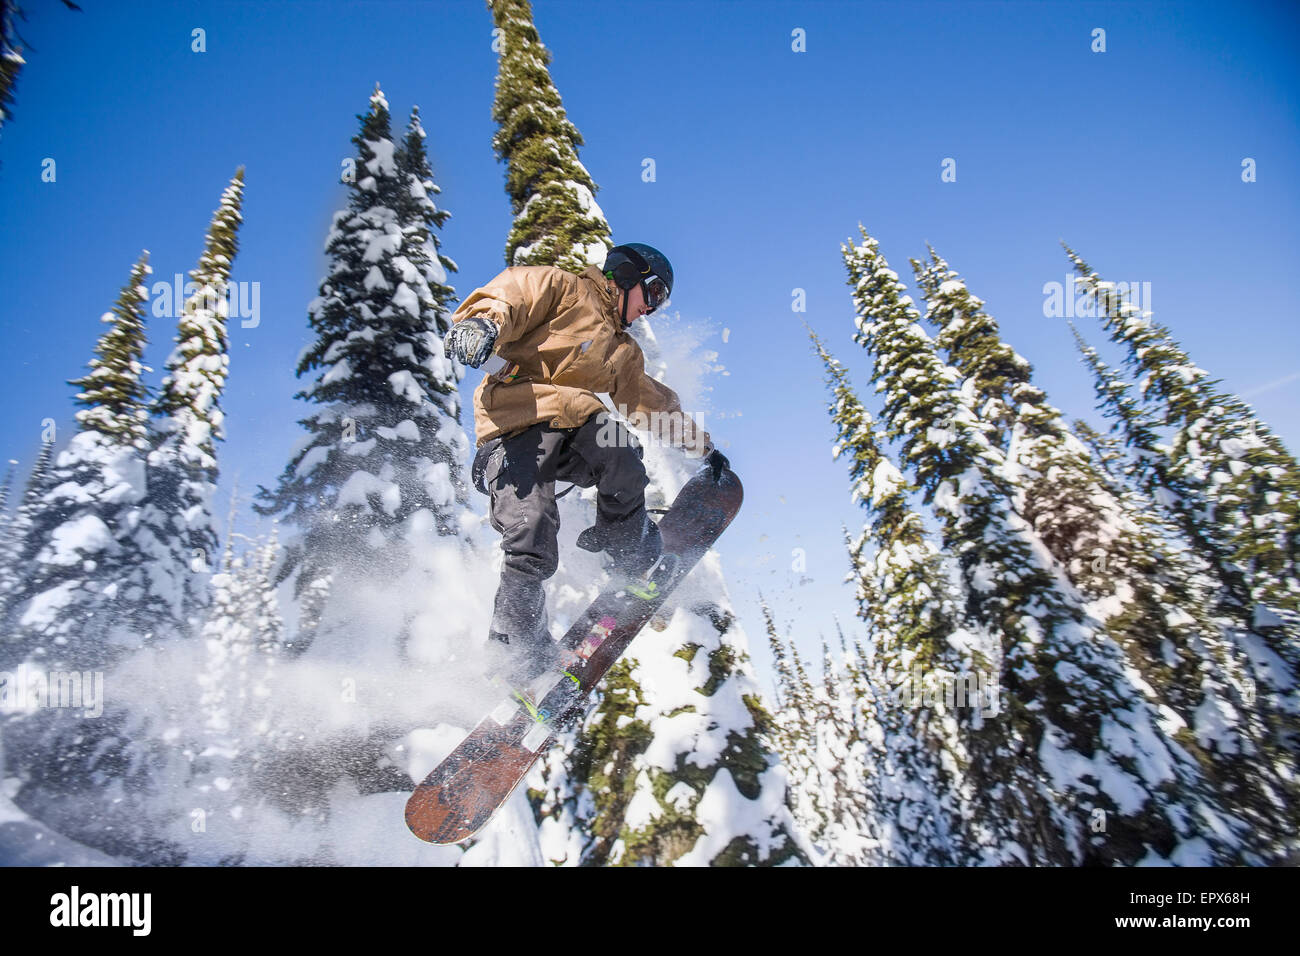 USA, Montana, Whitefish, Snowboarder in mid-air against snowy trees Stock Photo